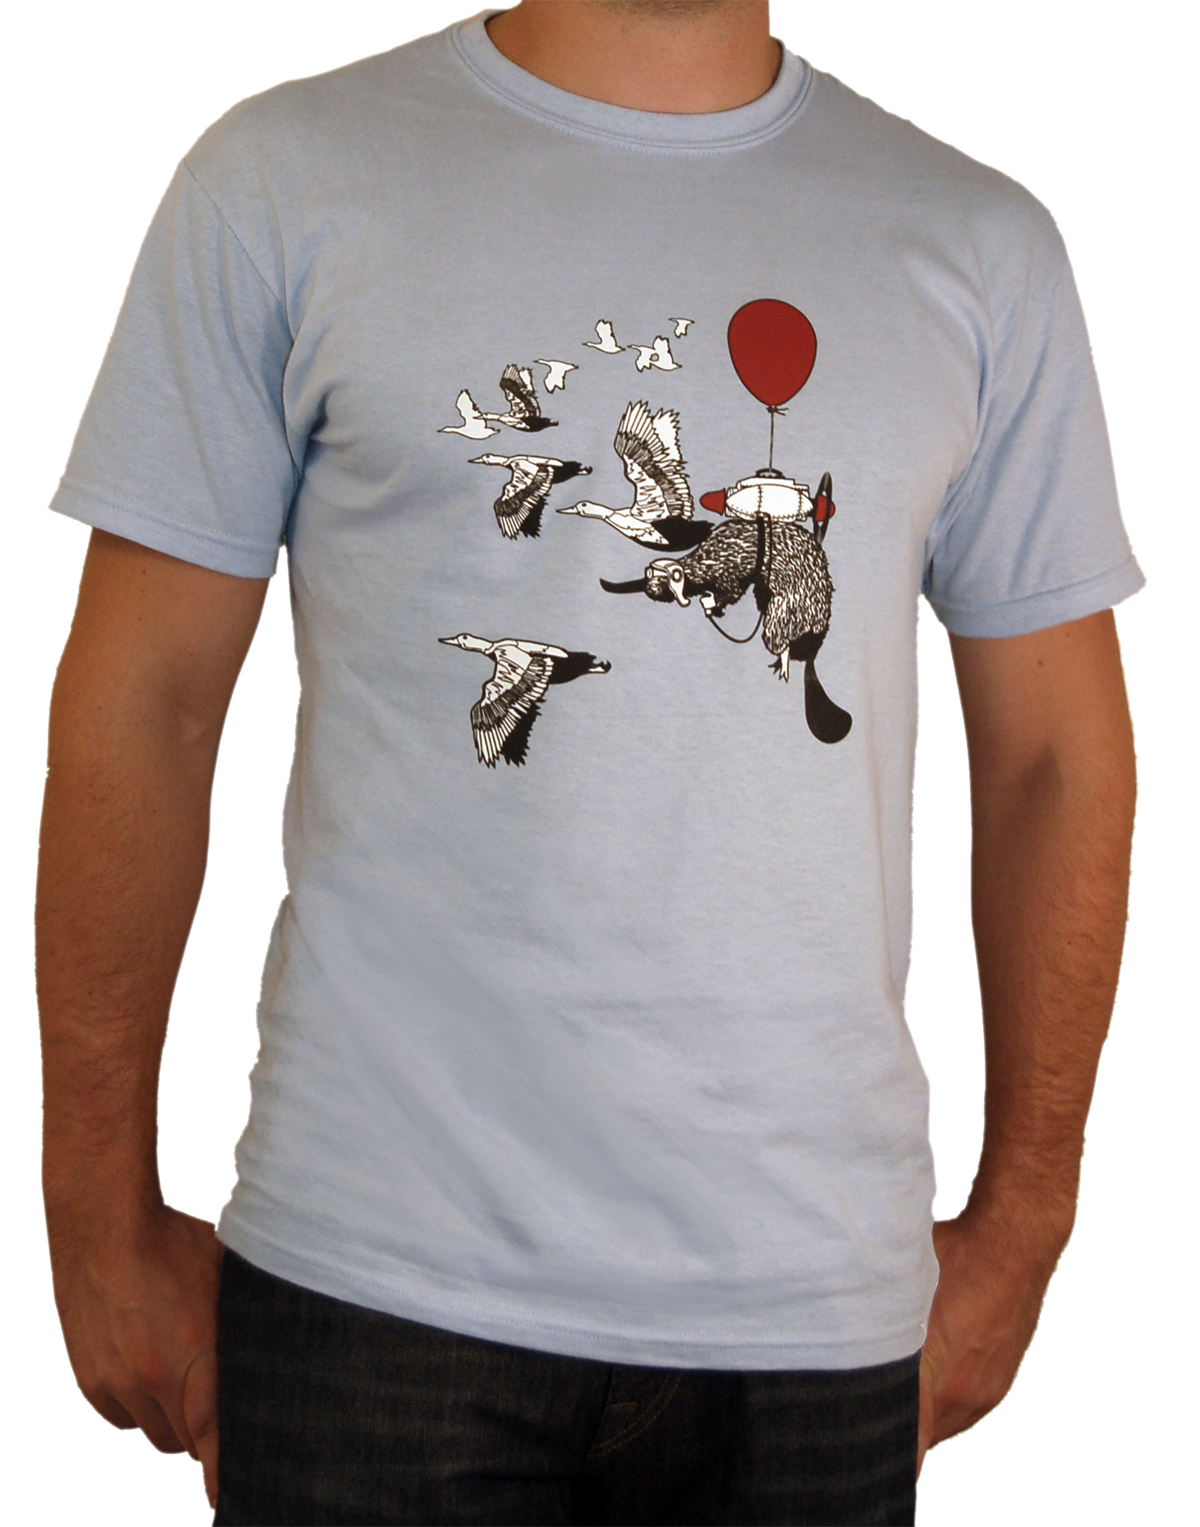 Flying with Cousins - Shirt